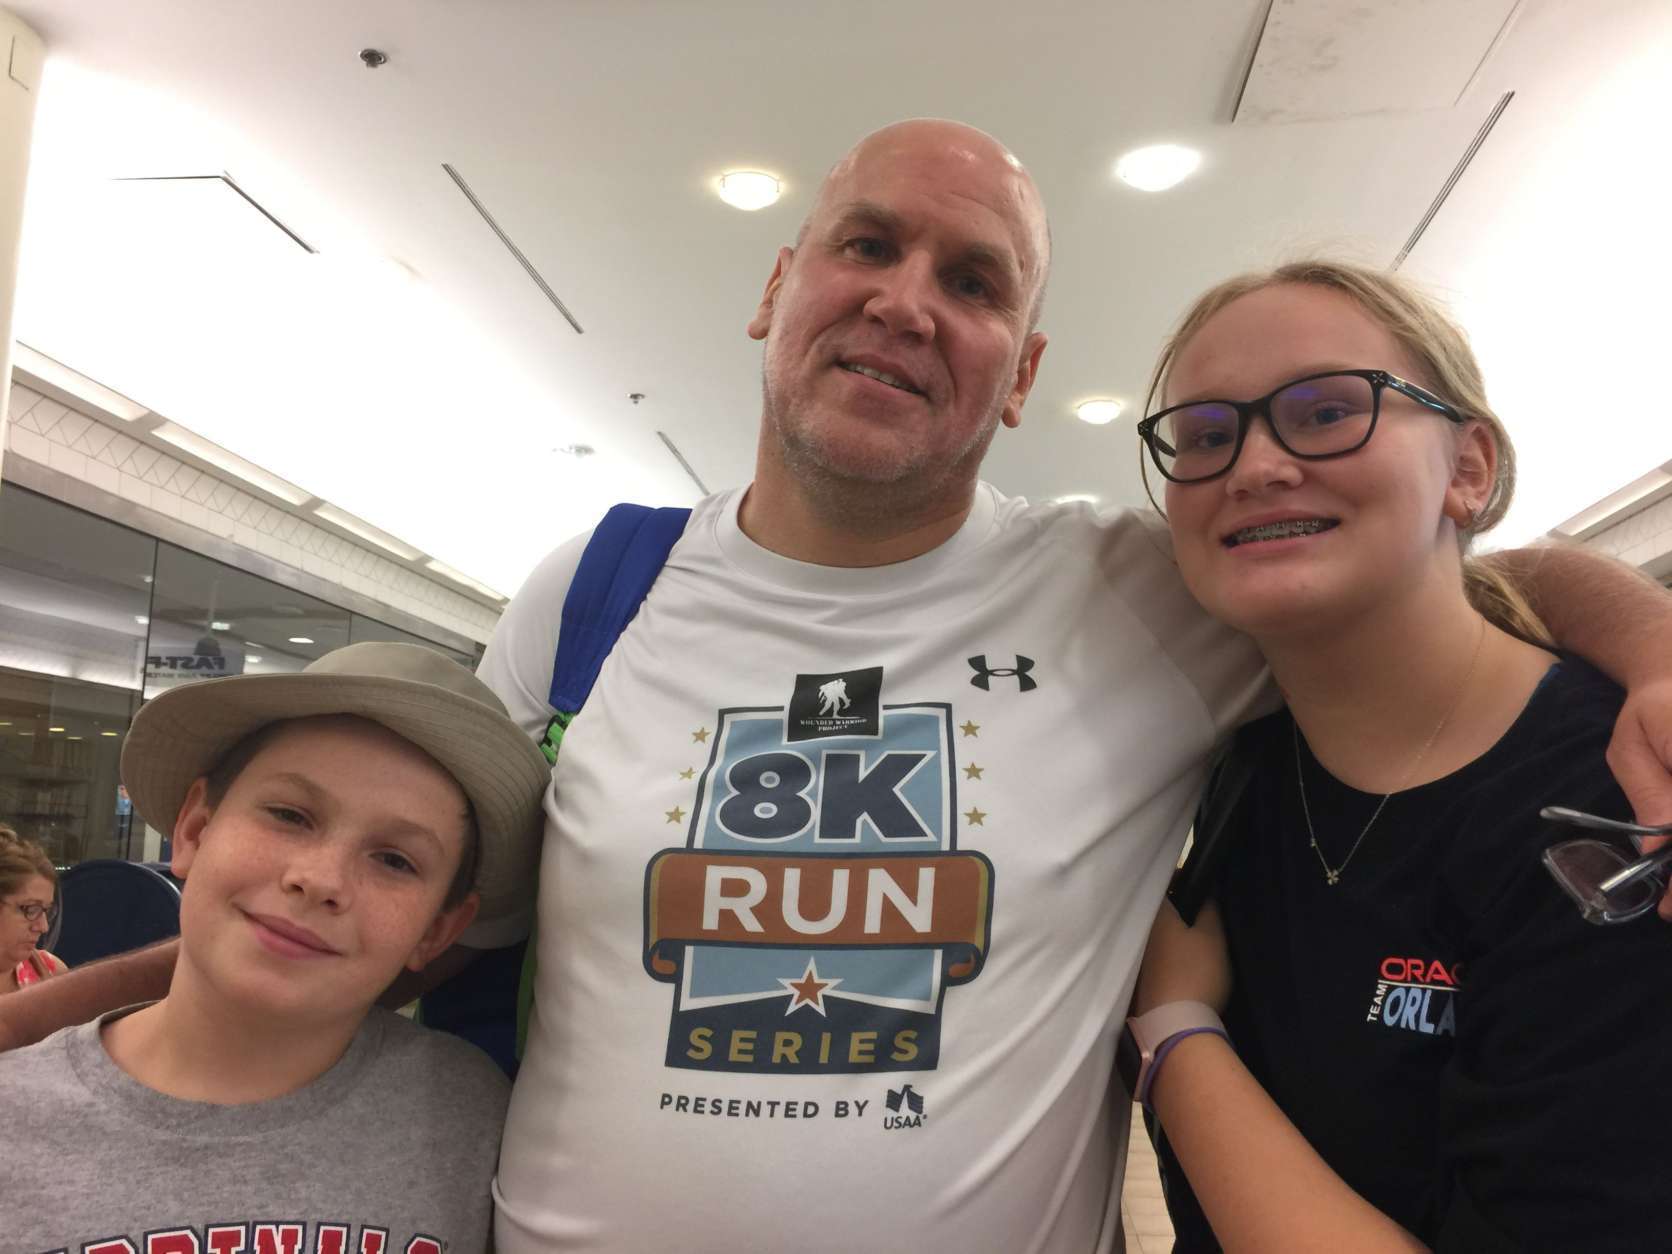 From Orlando, Florida Rob Stead is with his children David and Jessica. They were at Union Station vising Stead's uncle who works there. (WTOP/Kristi King)